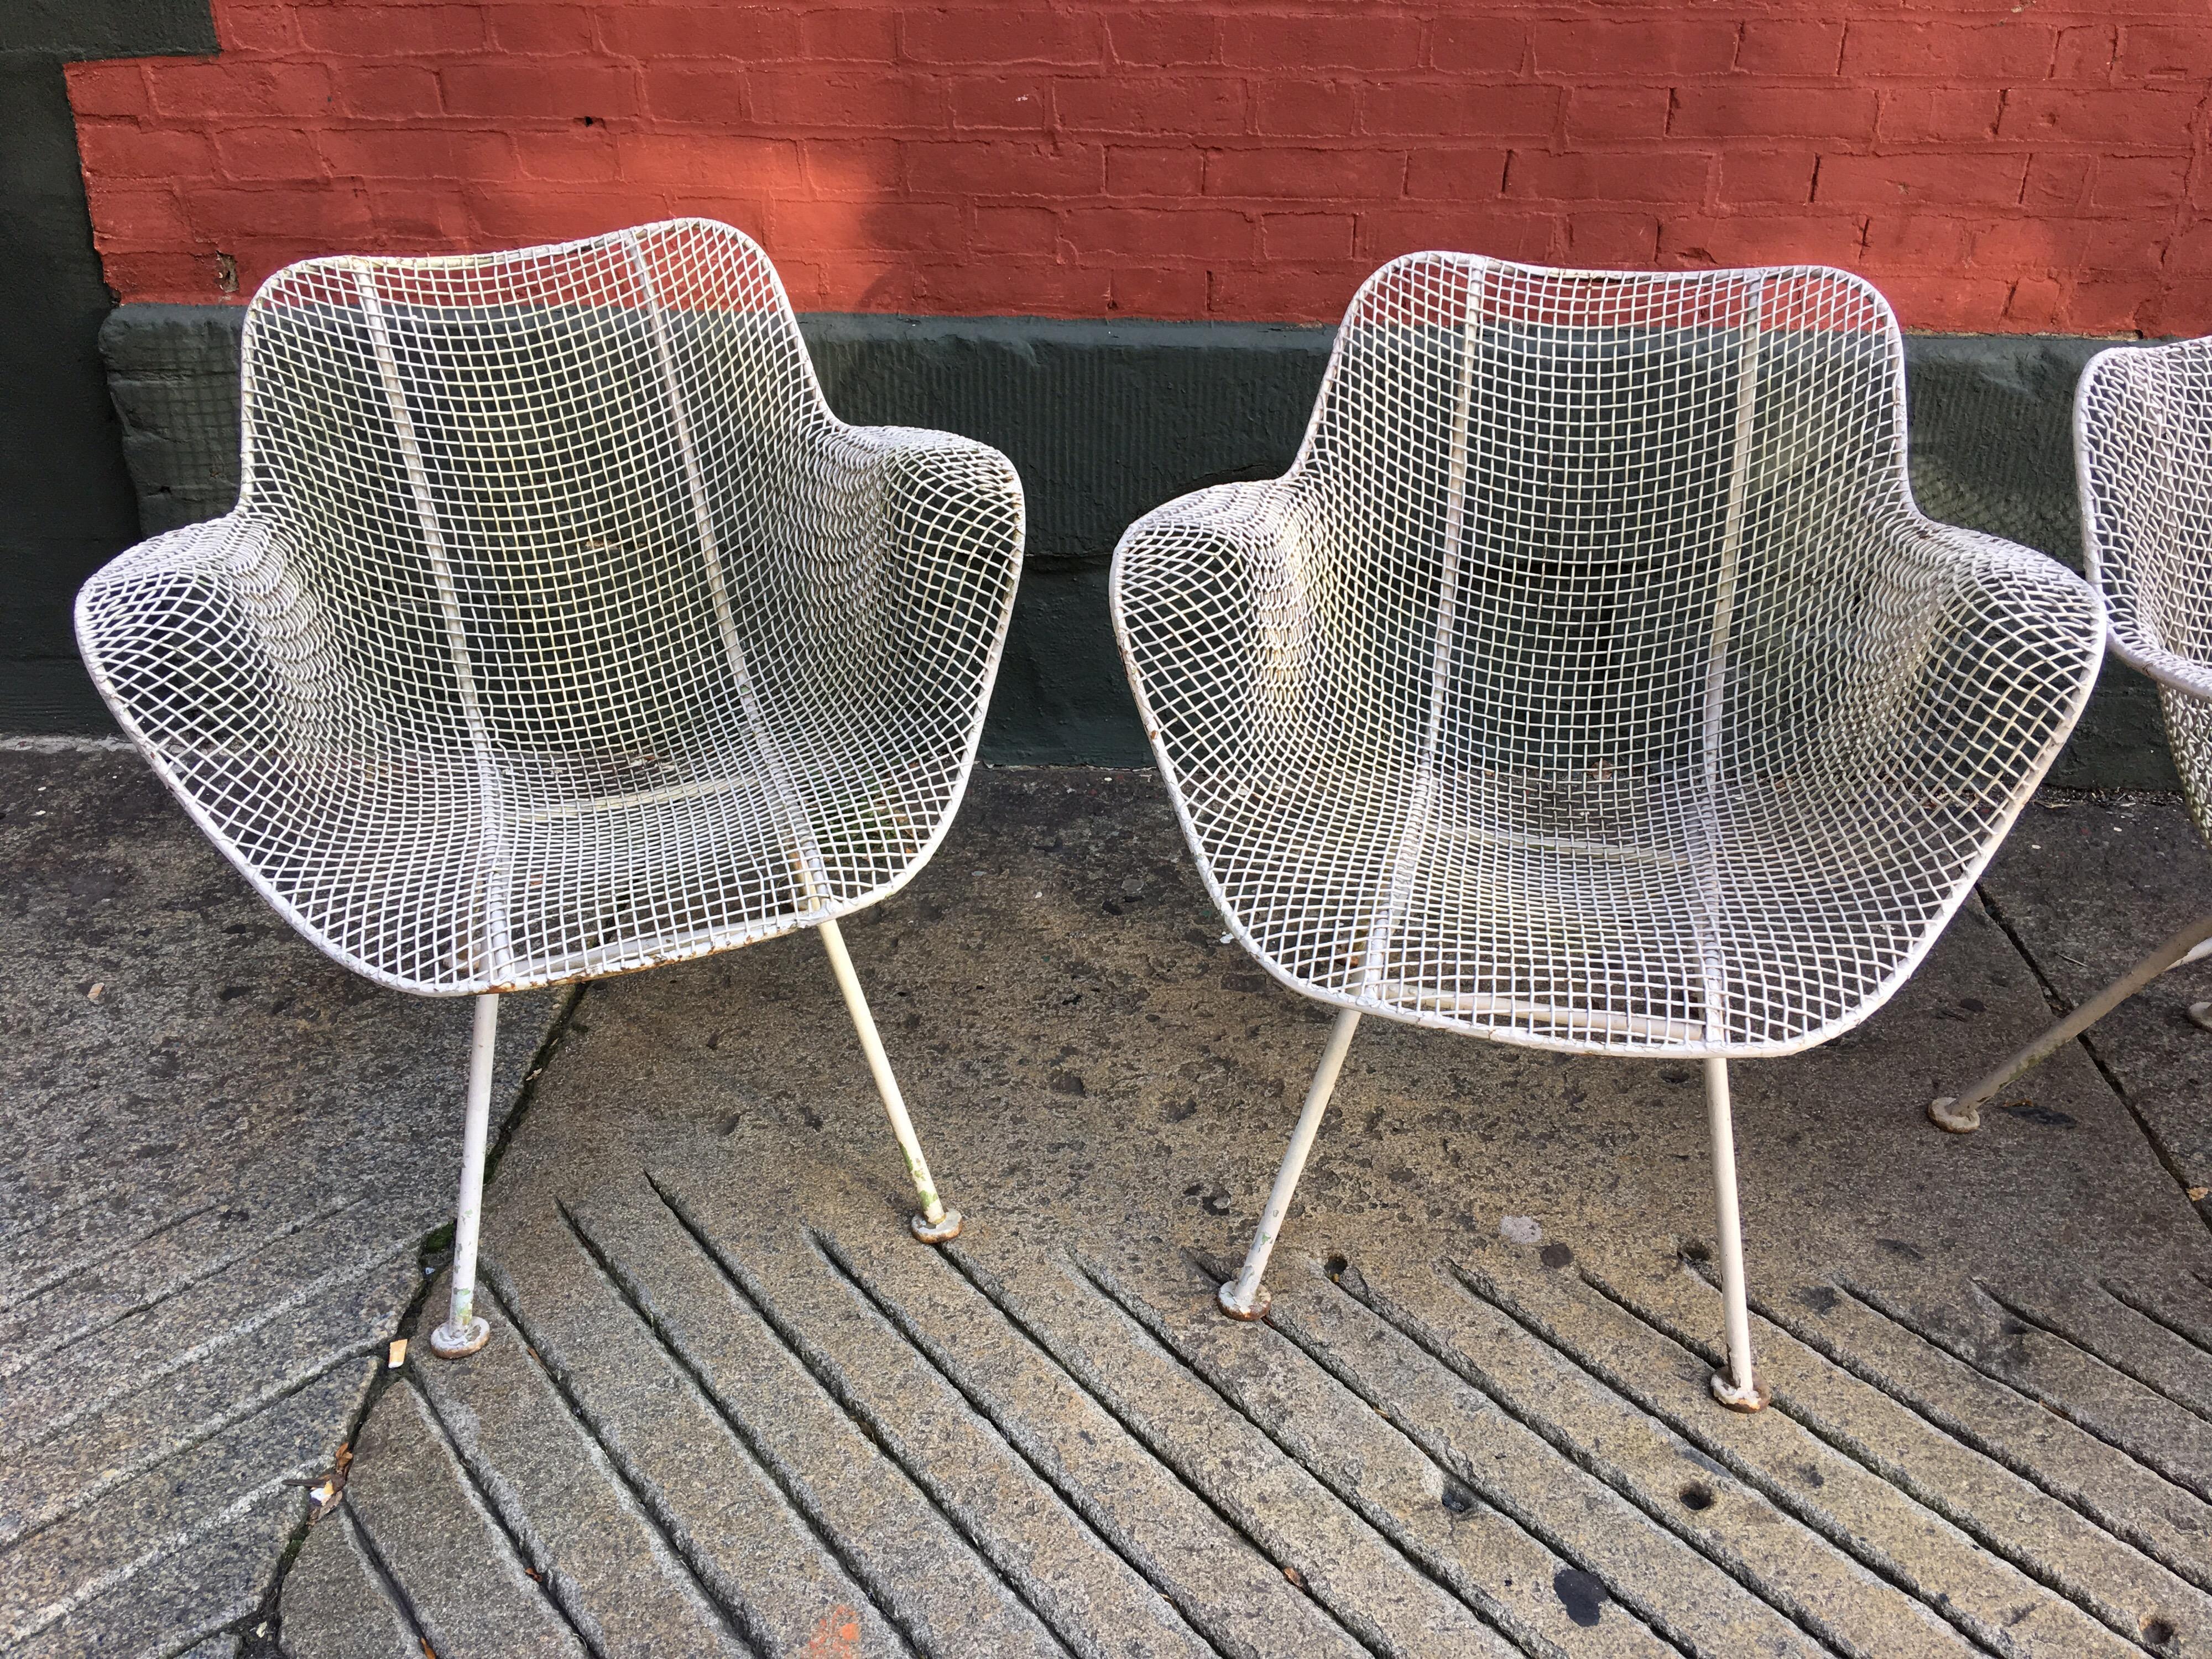 Nice Matched set of 4 John Woodard Patio Chairs in an off white. Several coats of paint! Powder Coating Services Available.